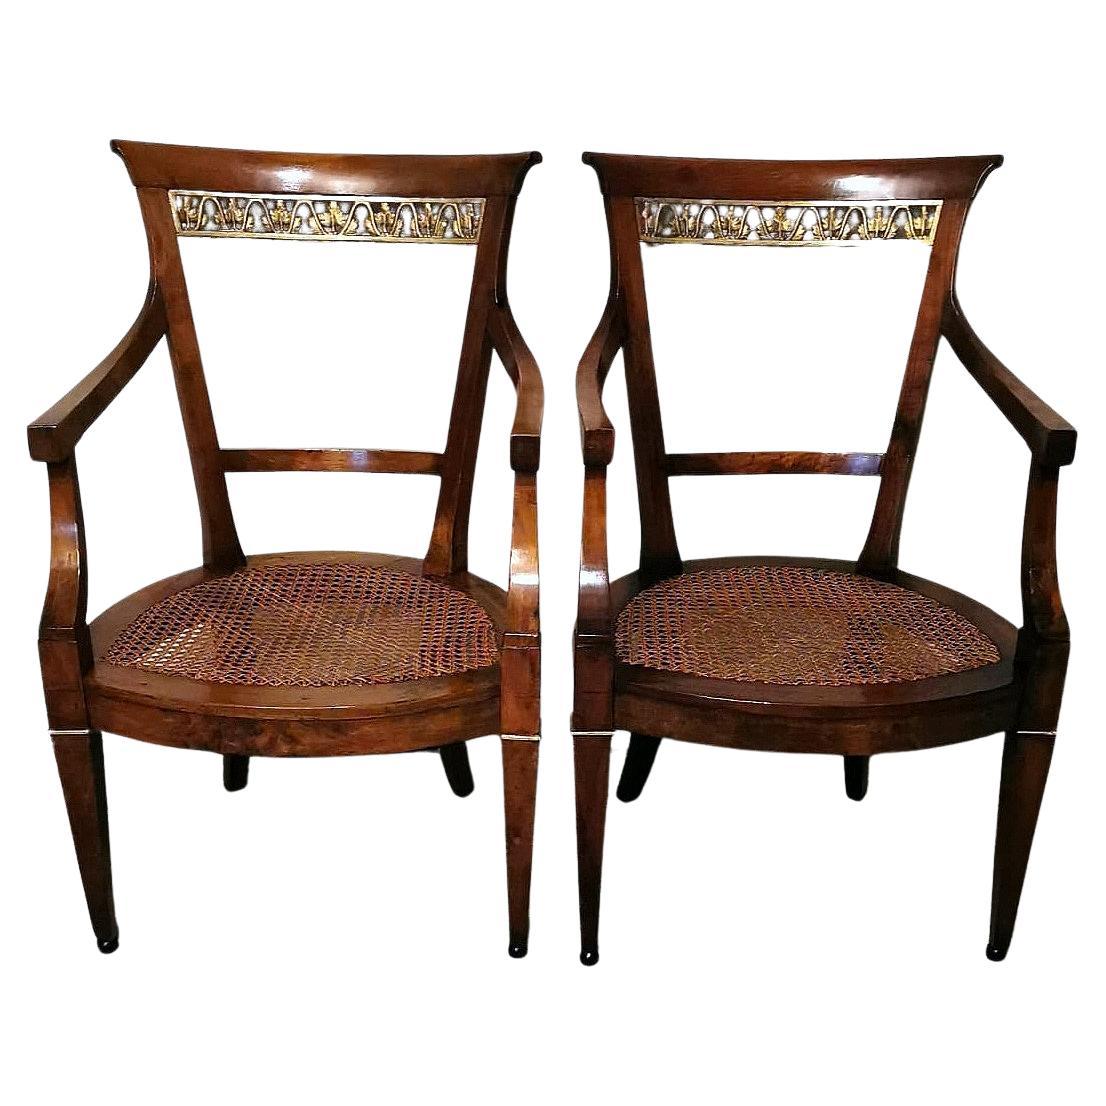 Empire Style Pair Of Italian Chairs "King" With "Vienna Straw" For Sale